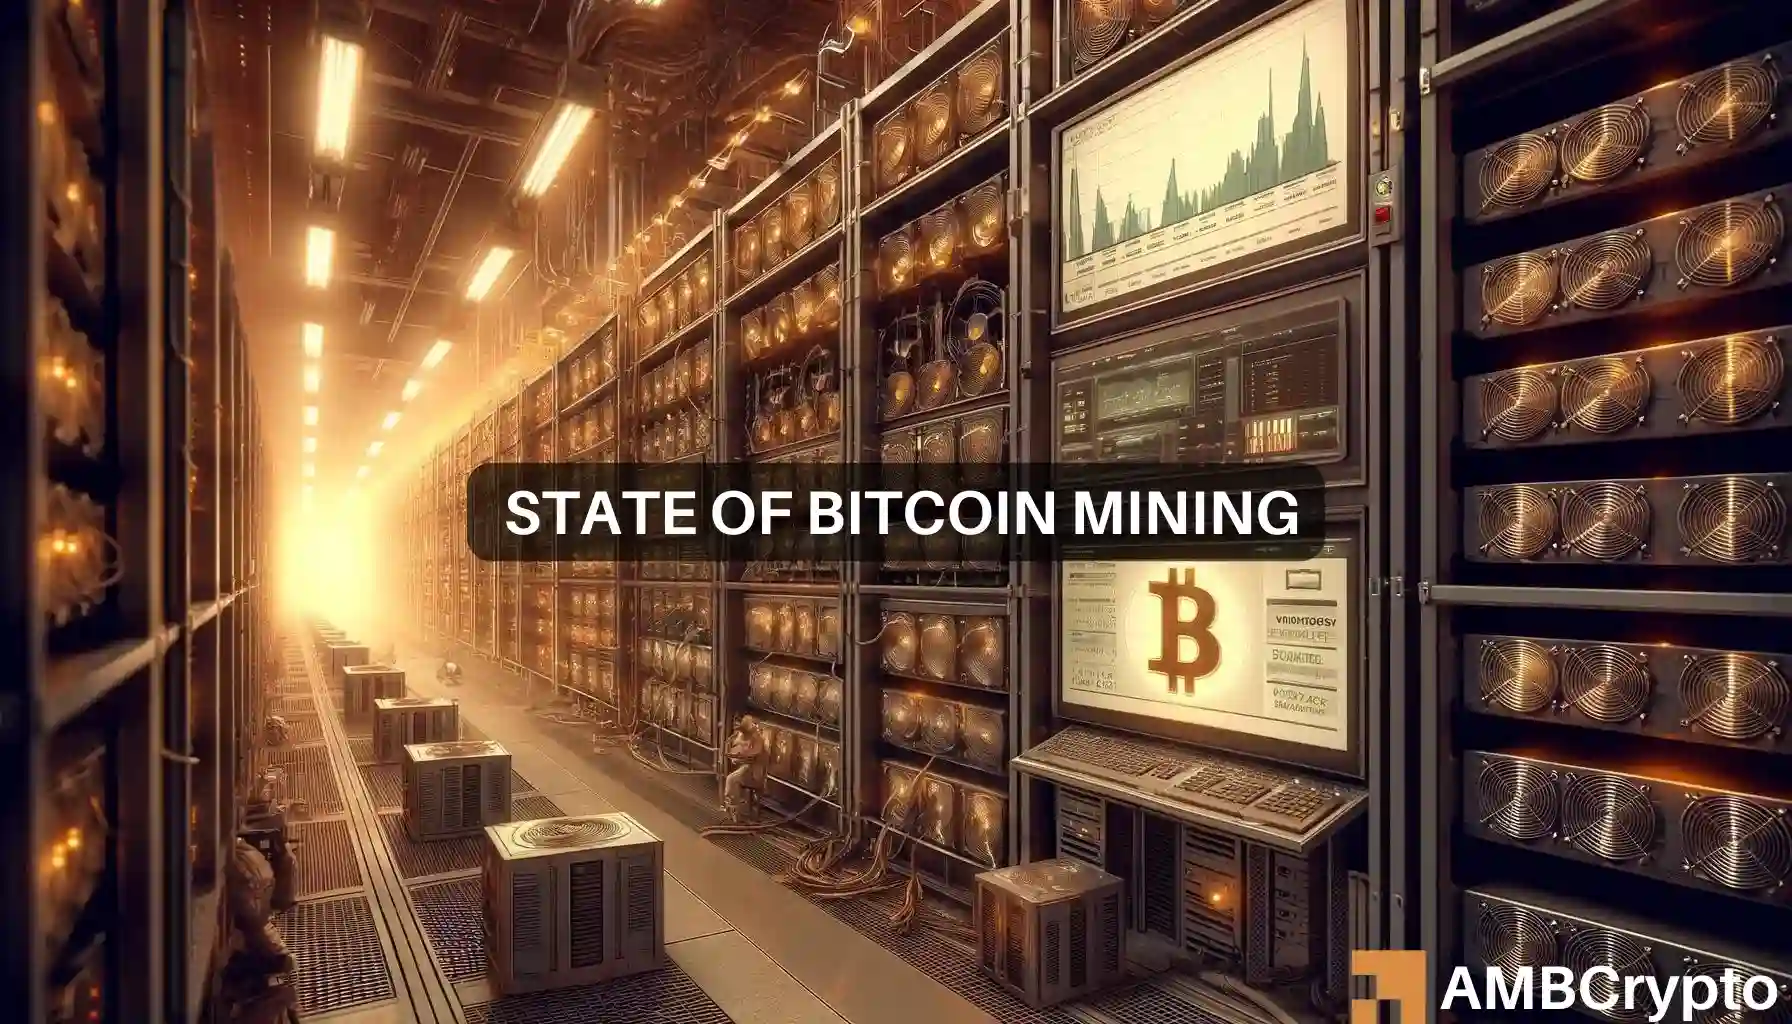 Bitcoin mining in May: Assessing the state of miners post-halving